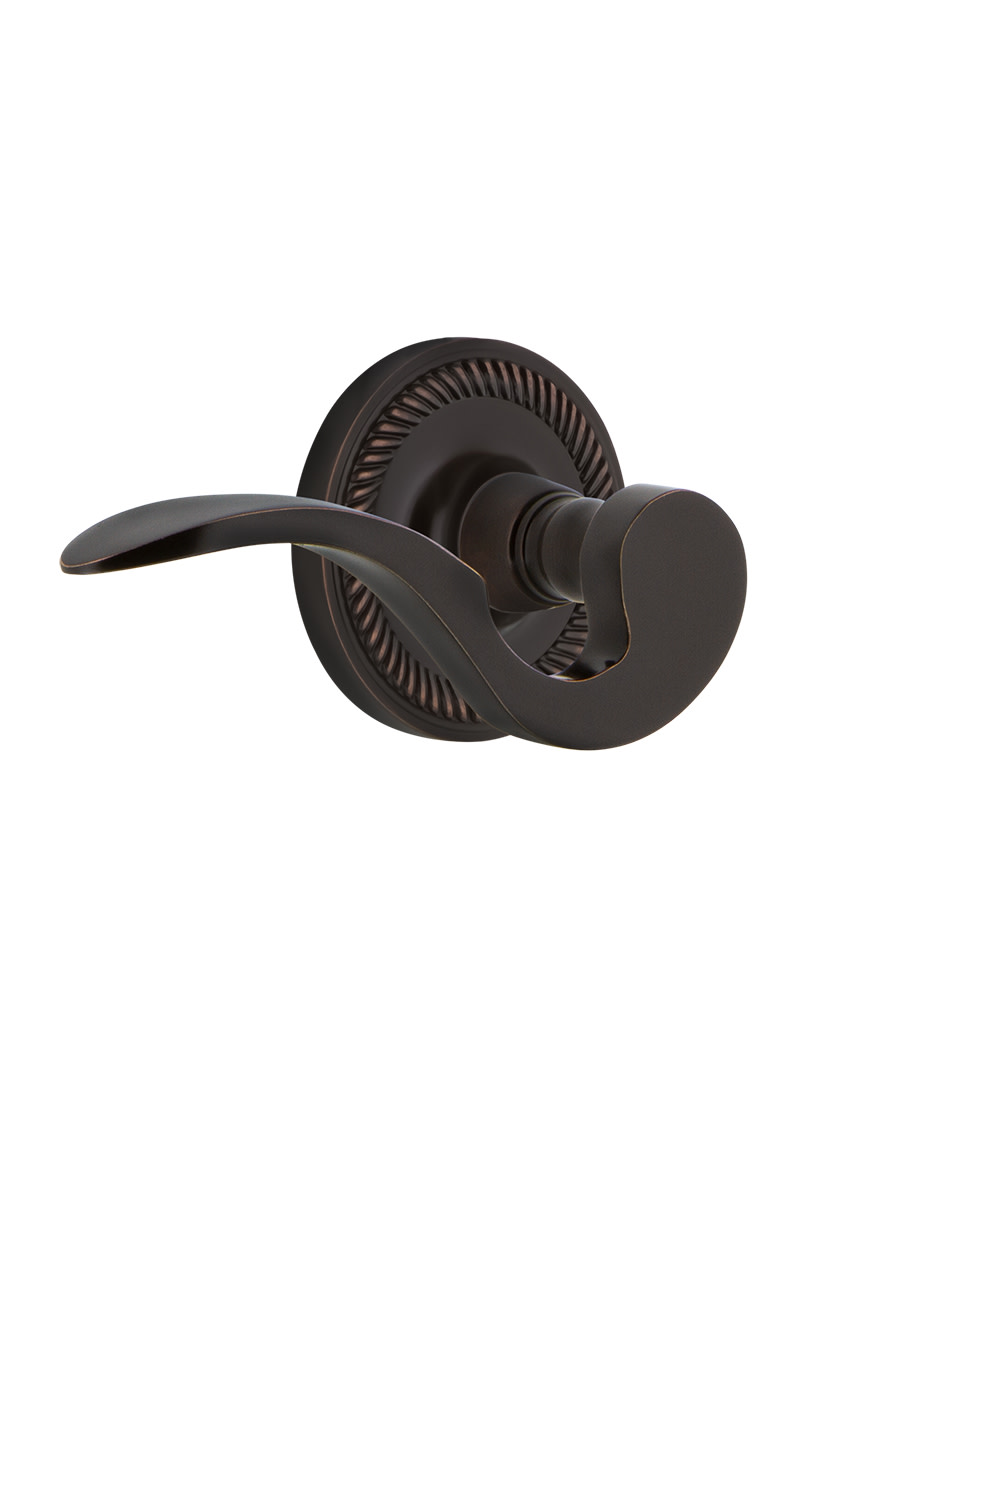 Nostalgic Warehouse Ropman_Sd_Nk_Lh Manor Non-Turning One-Sided Door Lever - Bronze - image 1 of 1